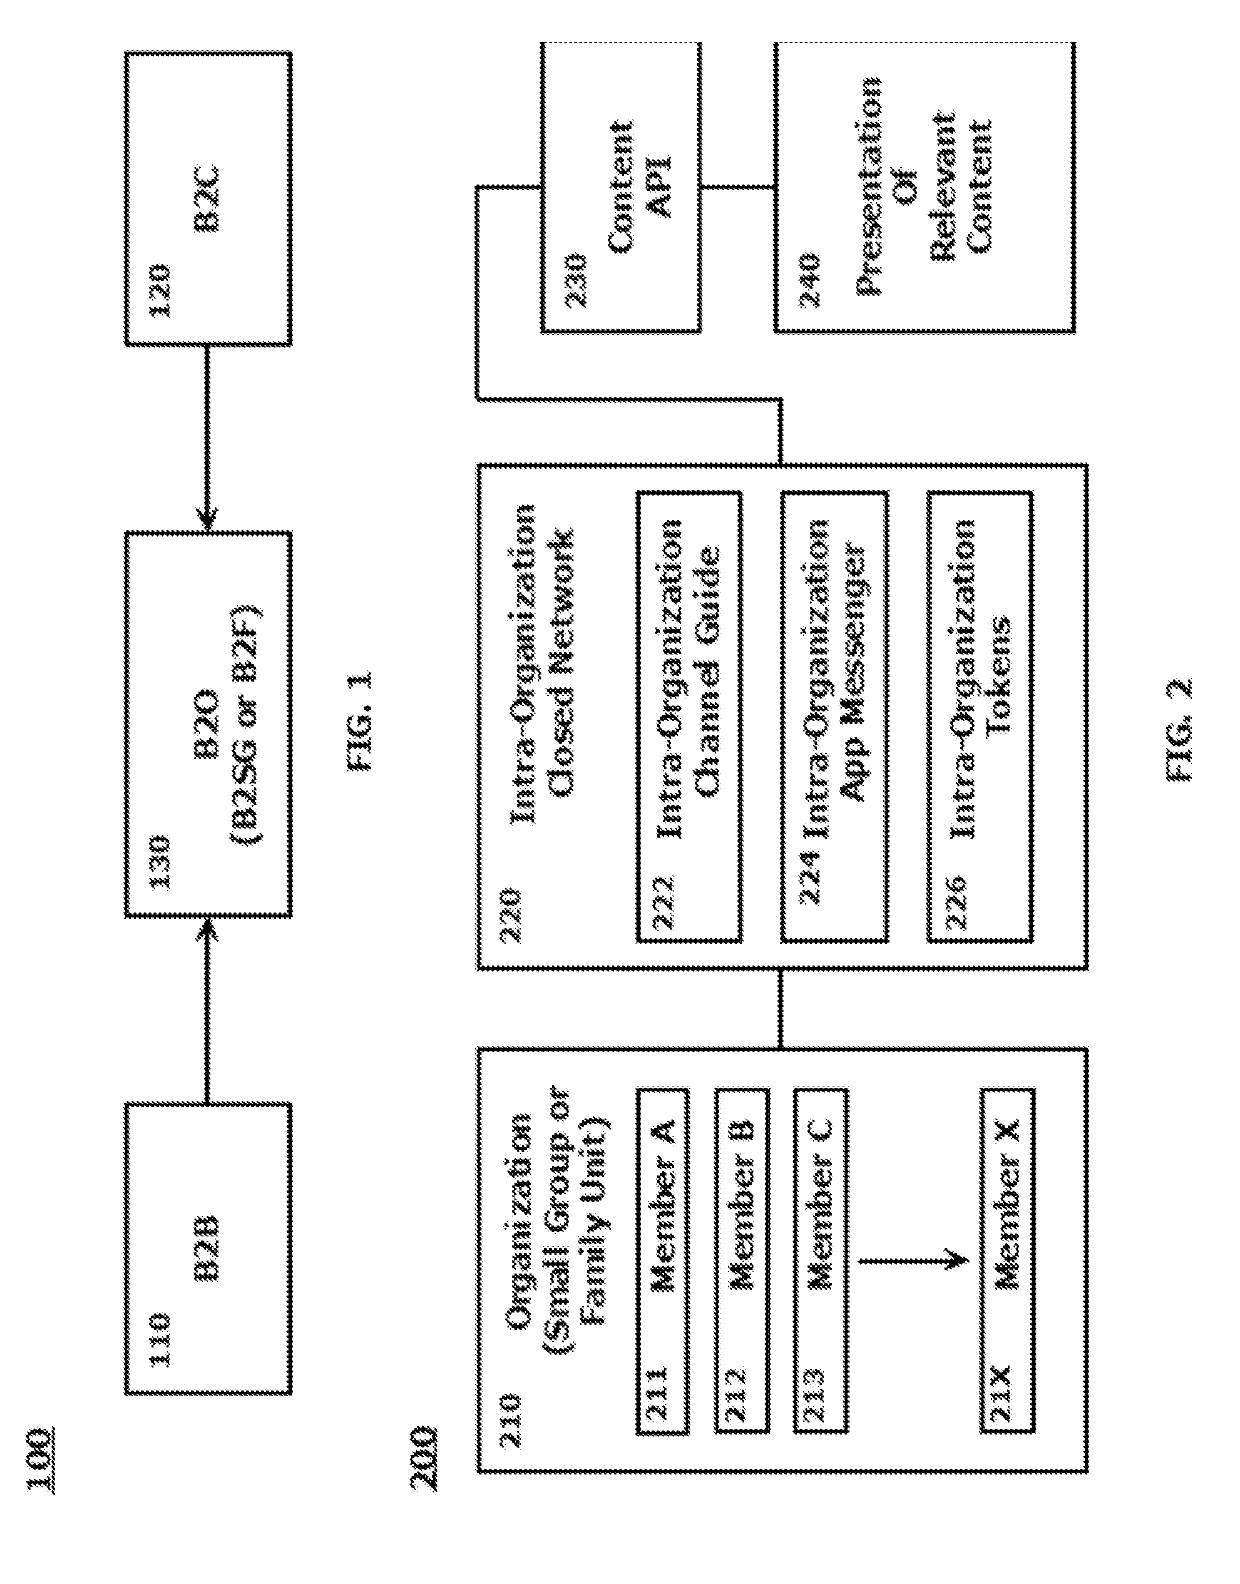 Systems and methods for providing advanced small group and family unit data sharing applications